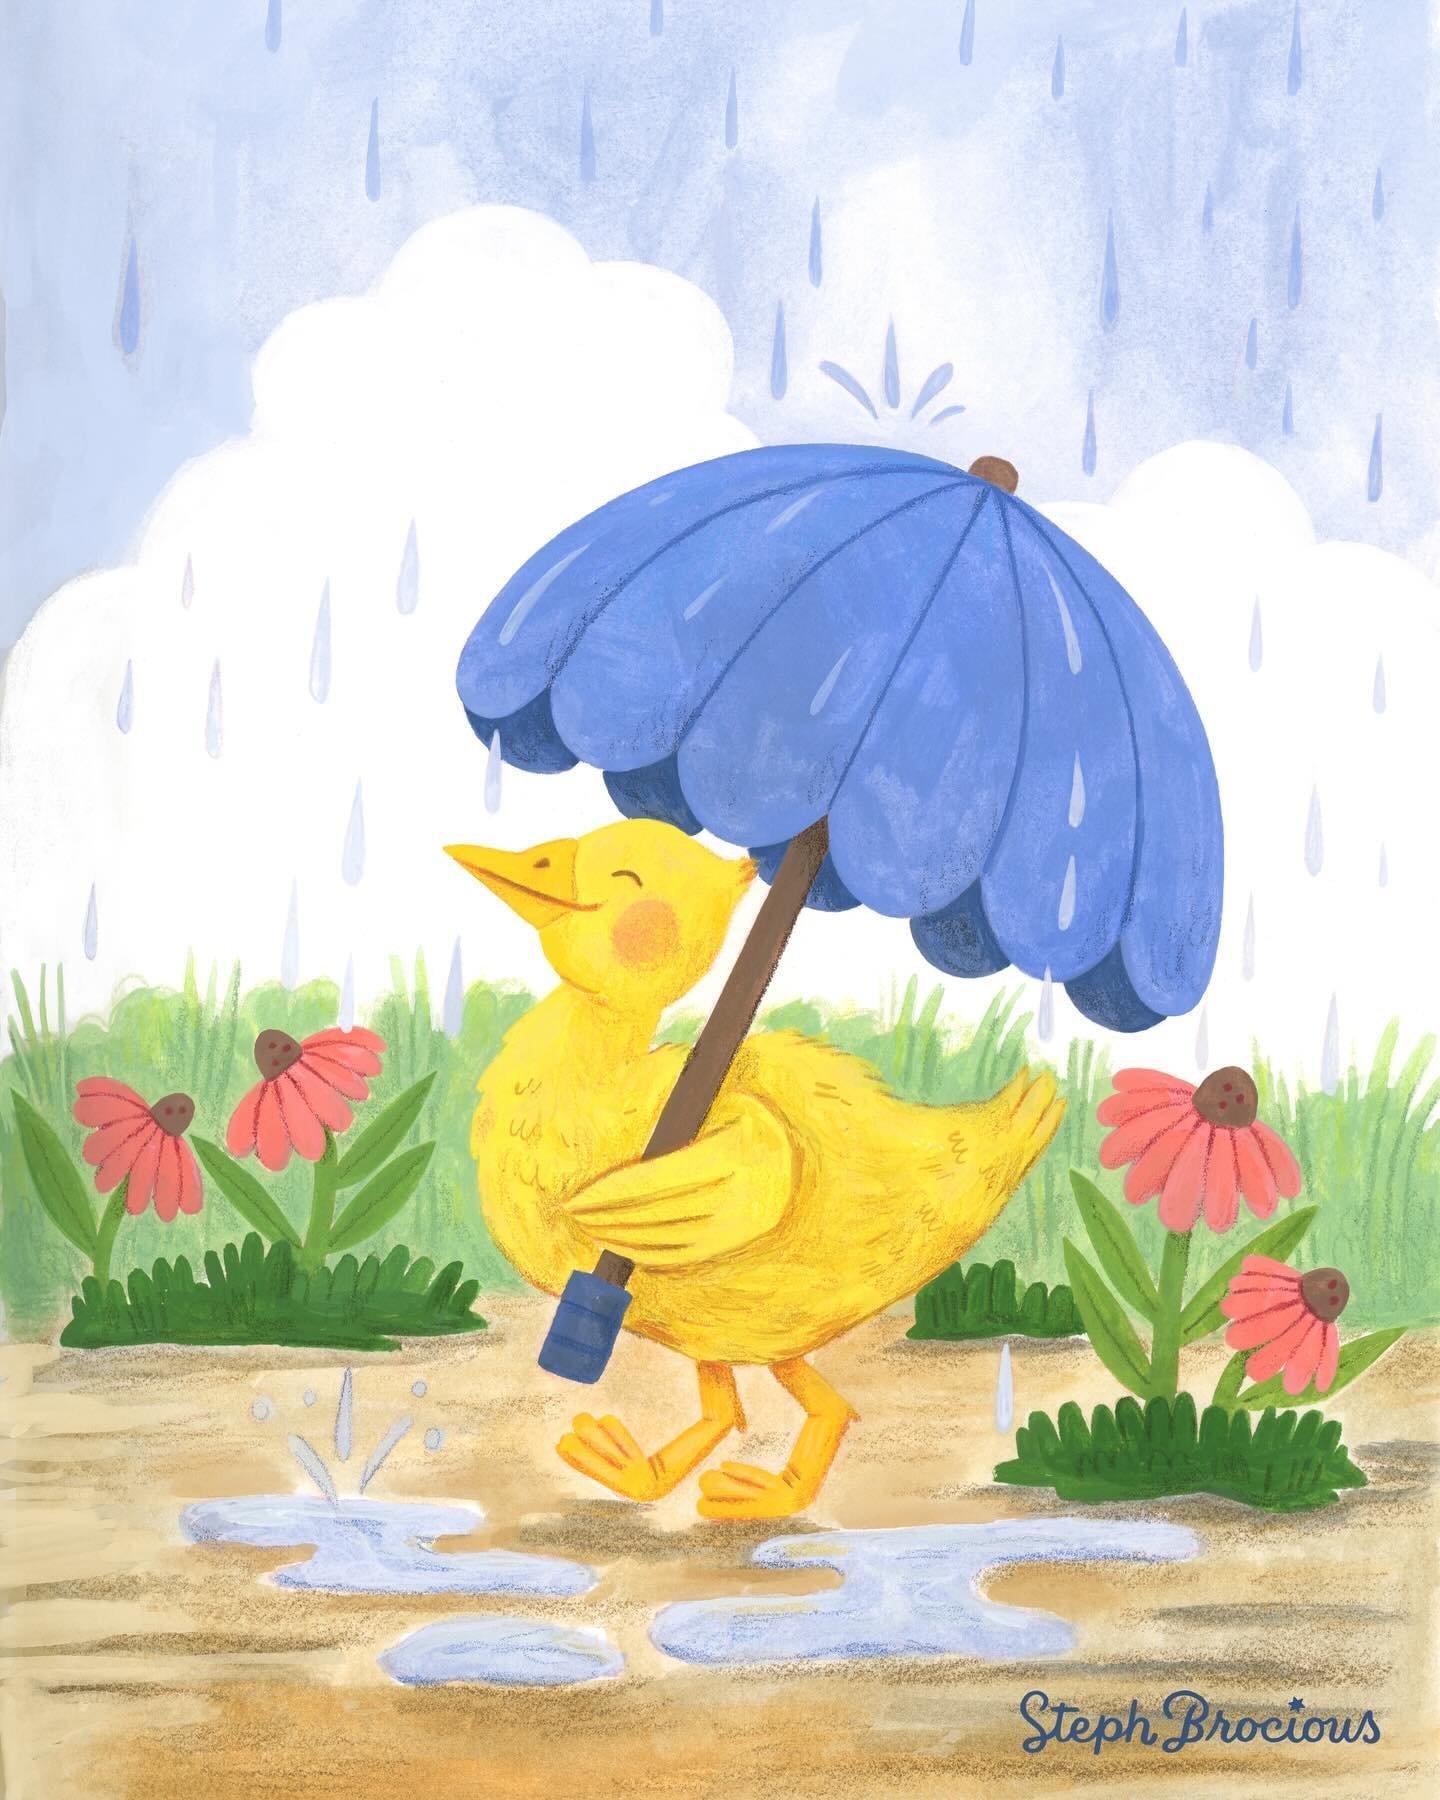 This illustration is for a Draw This in Your Style Challenge by @iamgiagraham ! This little duckie is super happy with his umbrella, I couldn&rsquo;t resist trying him out in my style. What do you think? 

#DrawWithGiaDTIYS #drawthisinyourstyle #dtiy